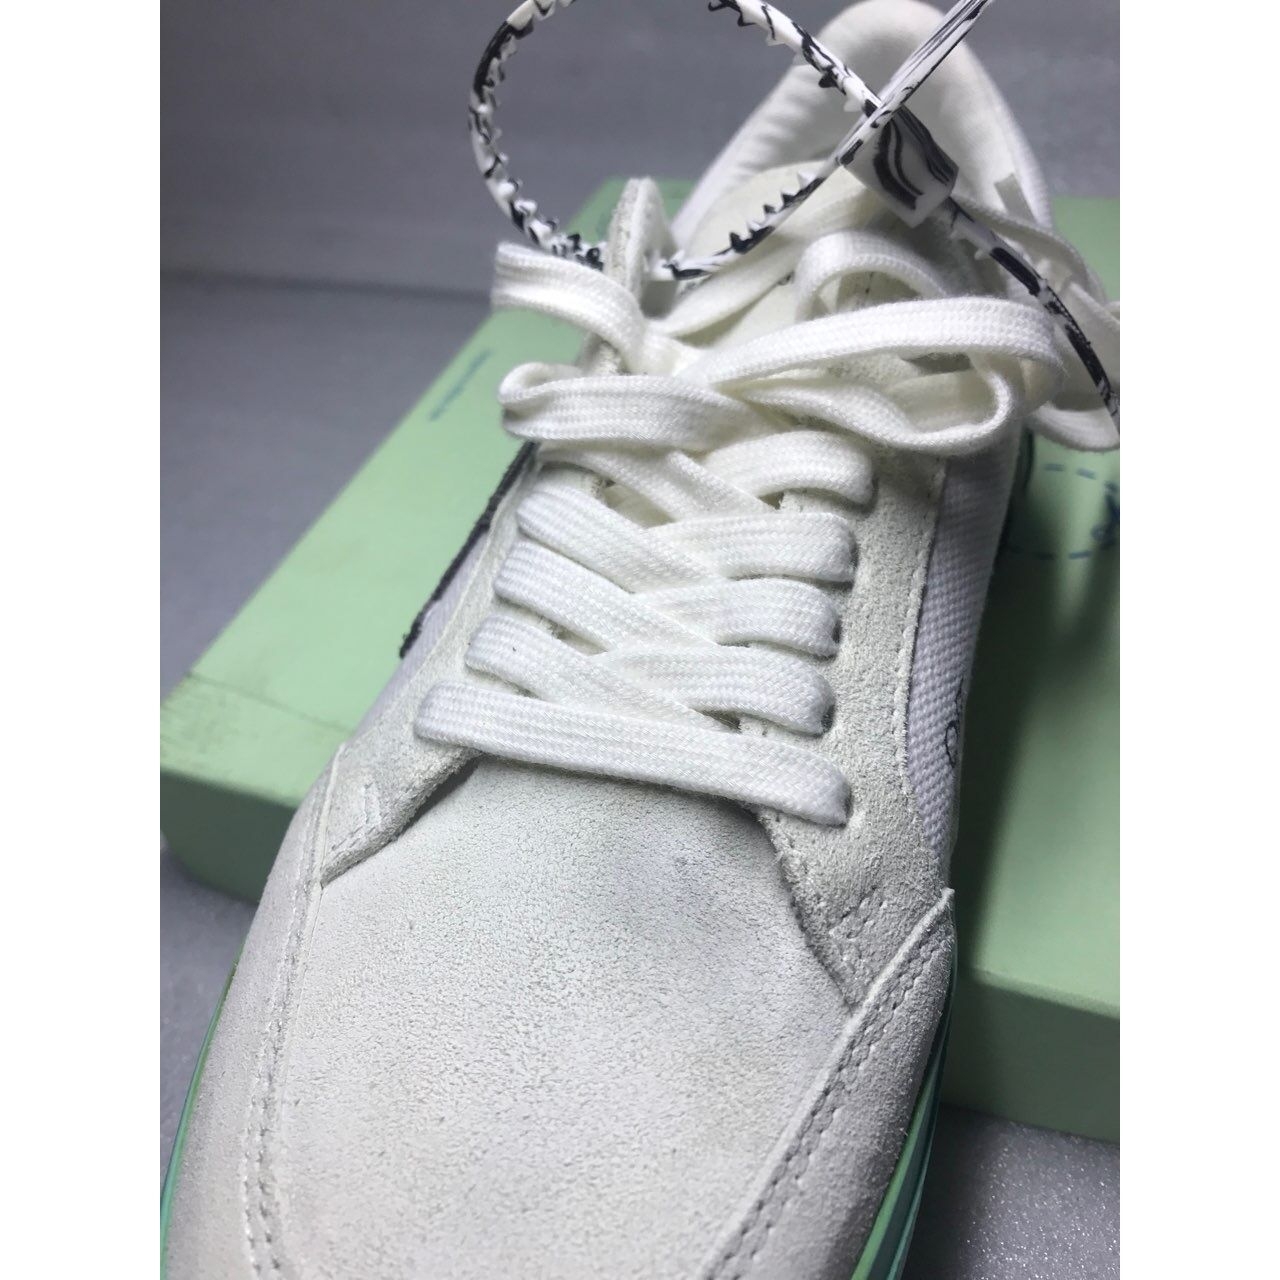 off white  low vulcanized sneakers white and mint geeen